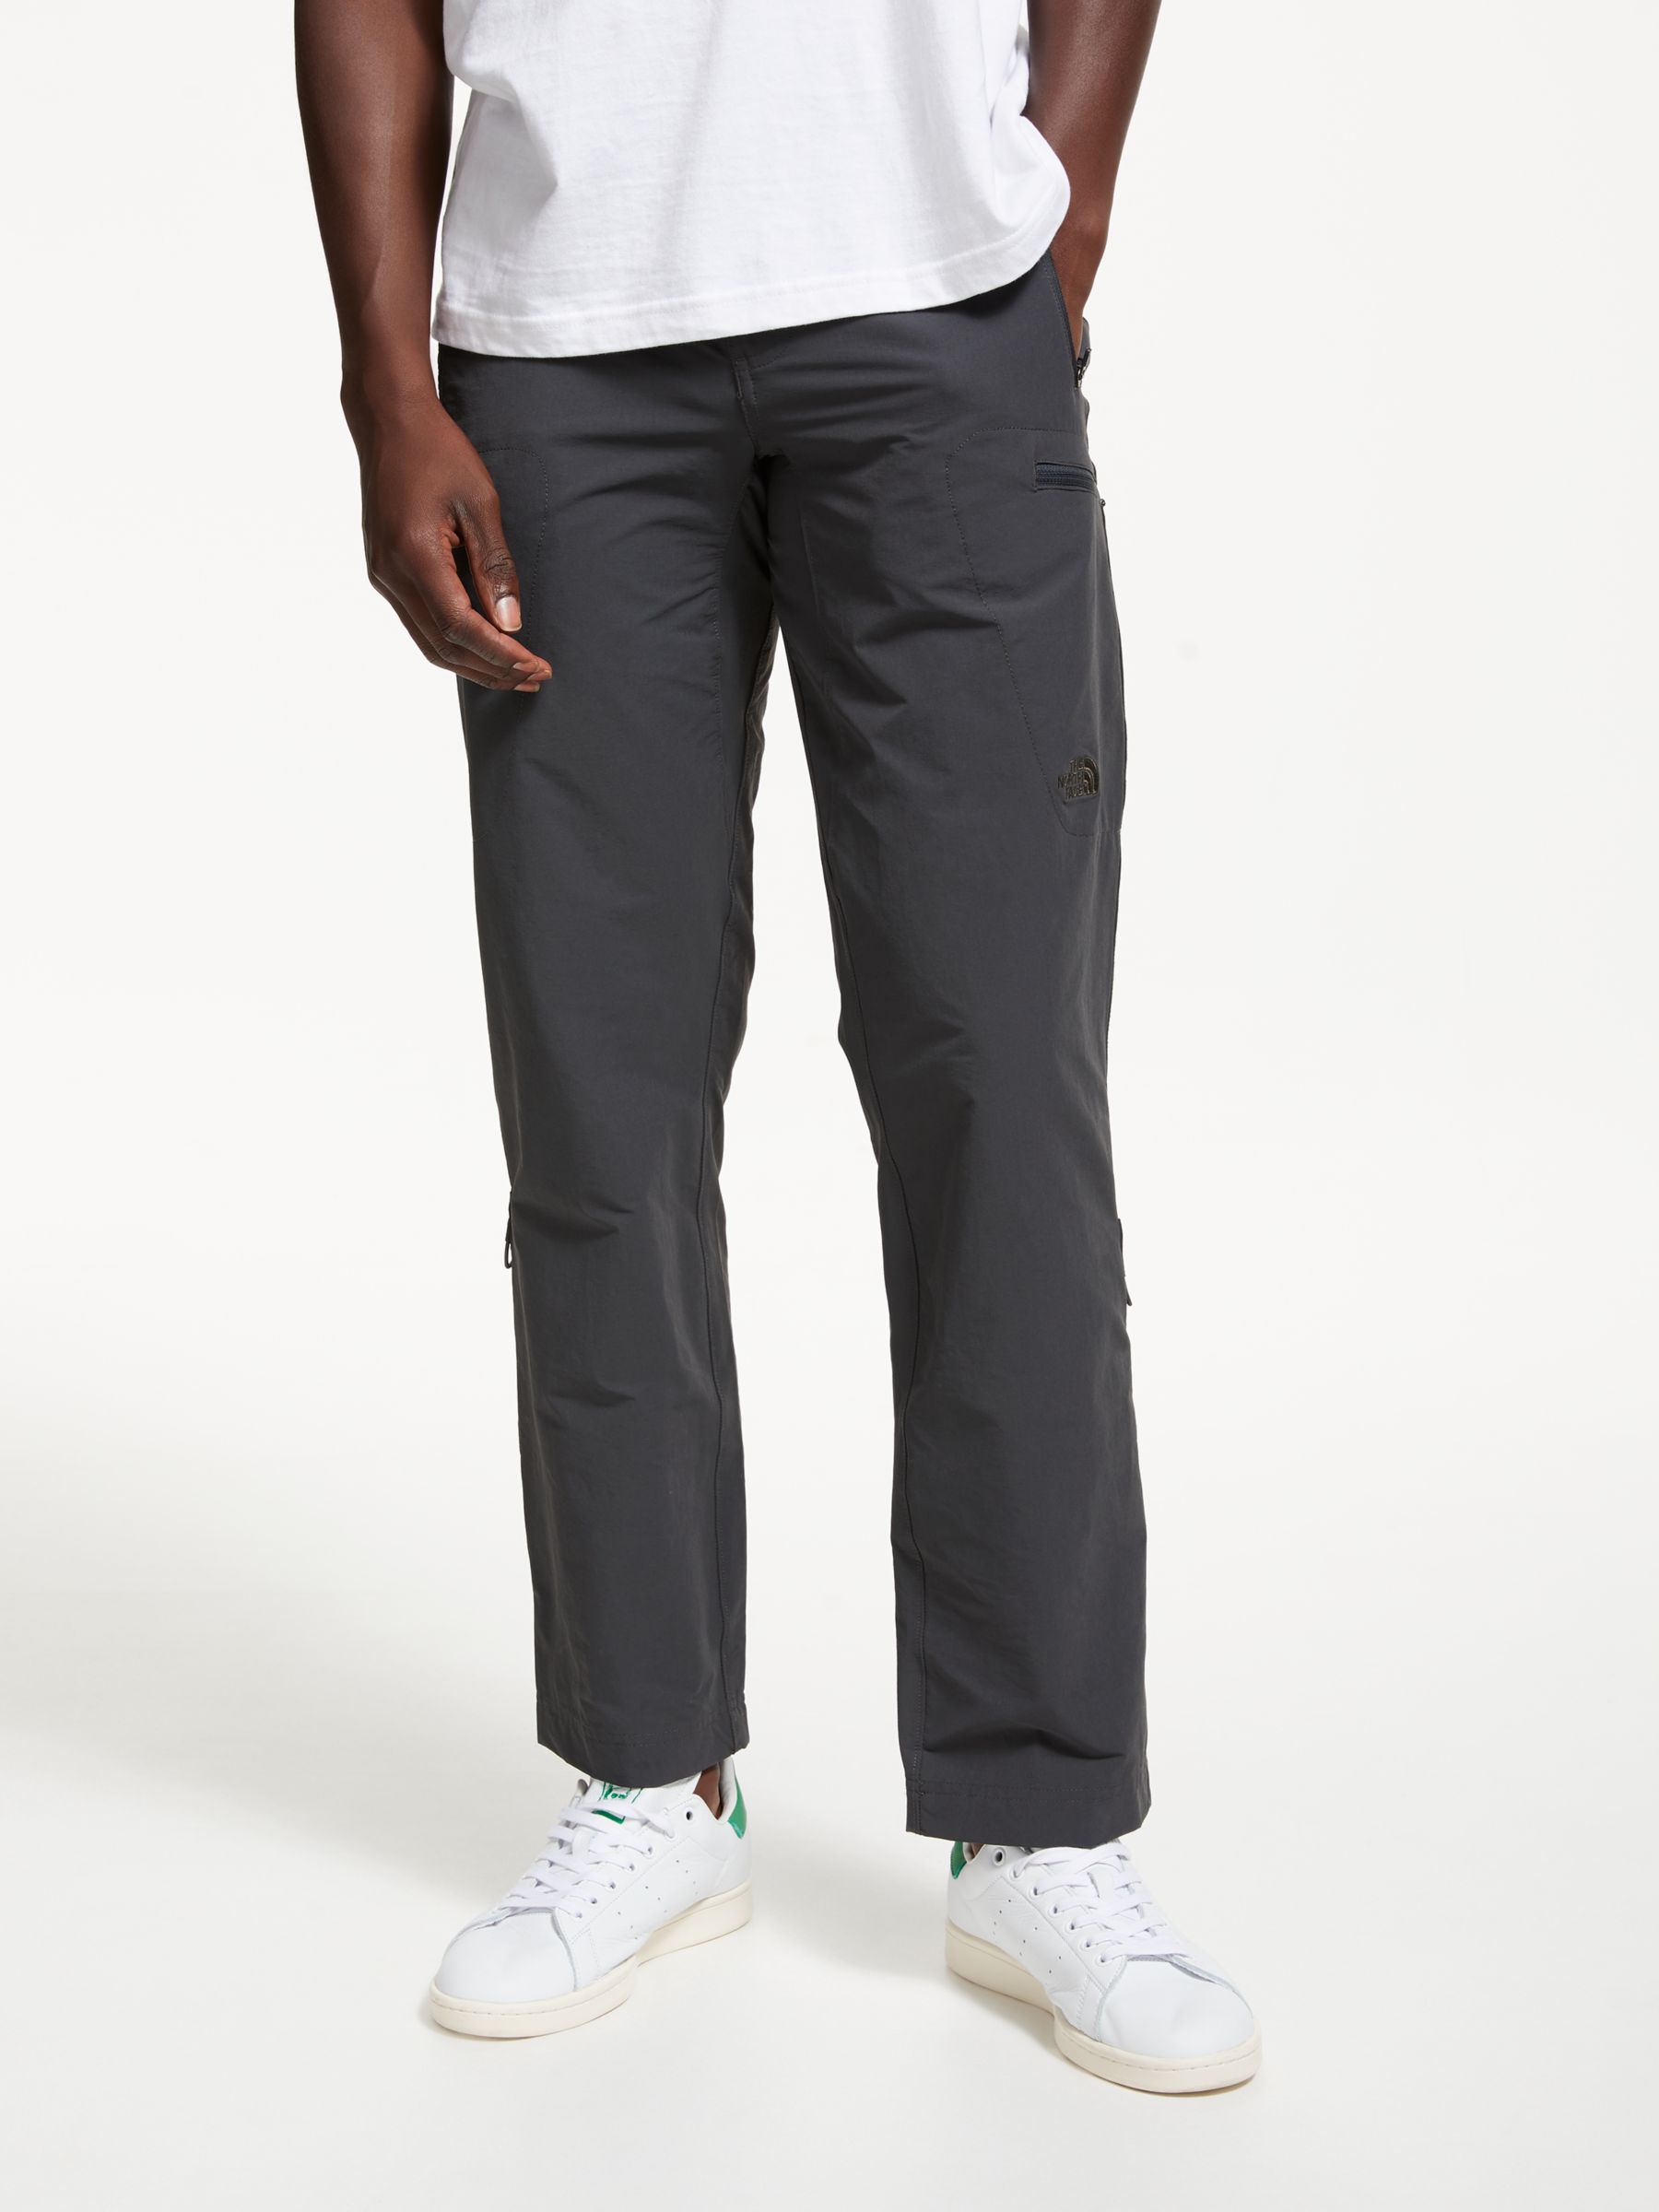 north face exploration trousers mens